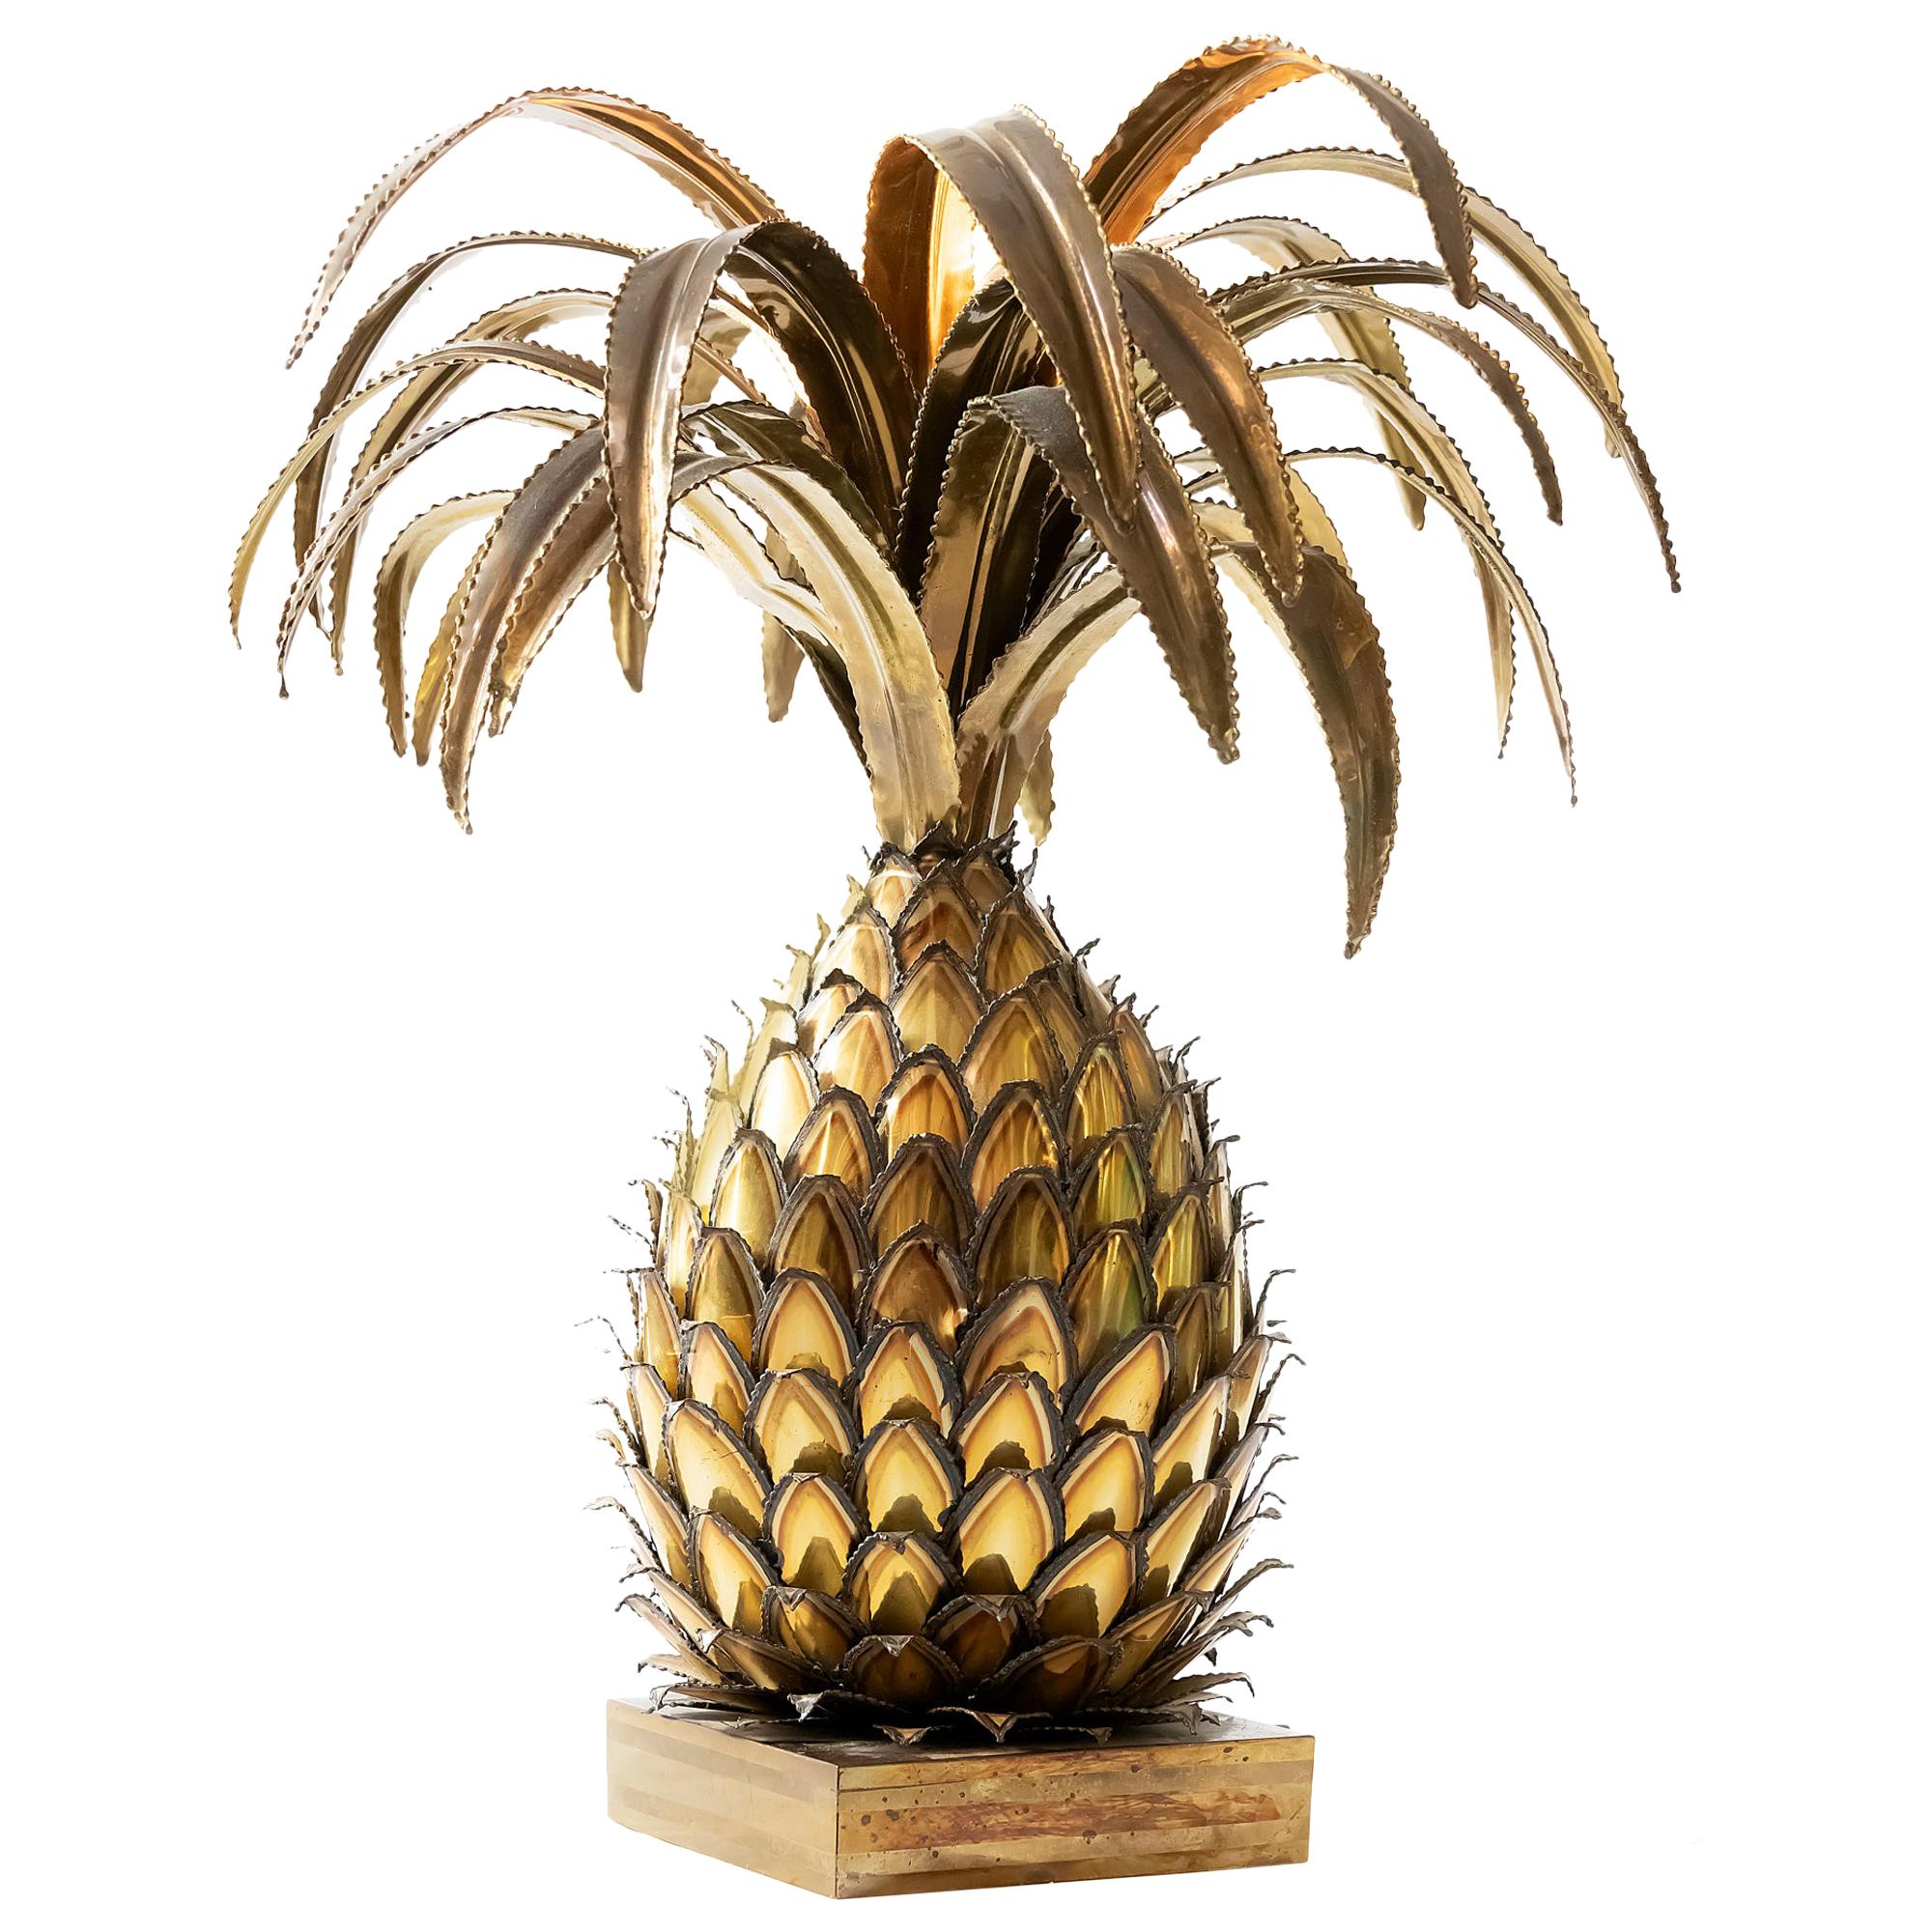 Vintage French Pineapple/Ananas Table Lamp by Maison Jansen at 1stDibs |  lampe ananas maison jansen, ananas french, maison jansen ananas lampe